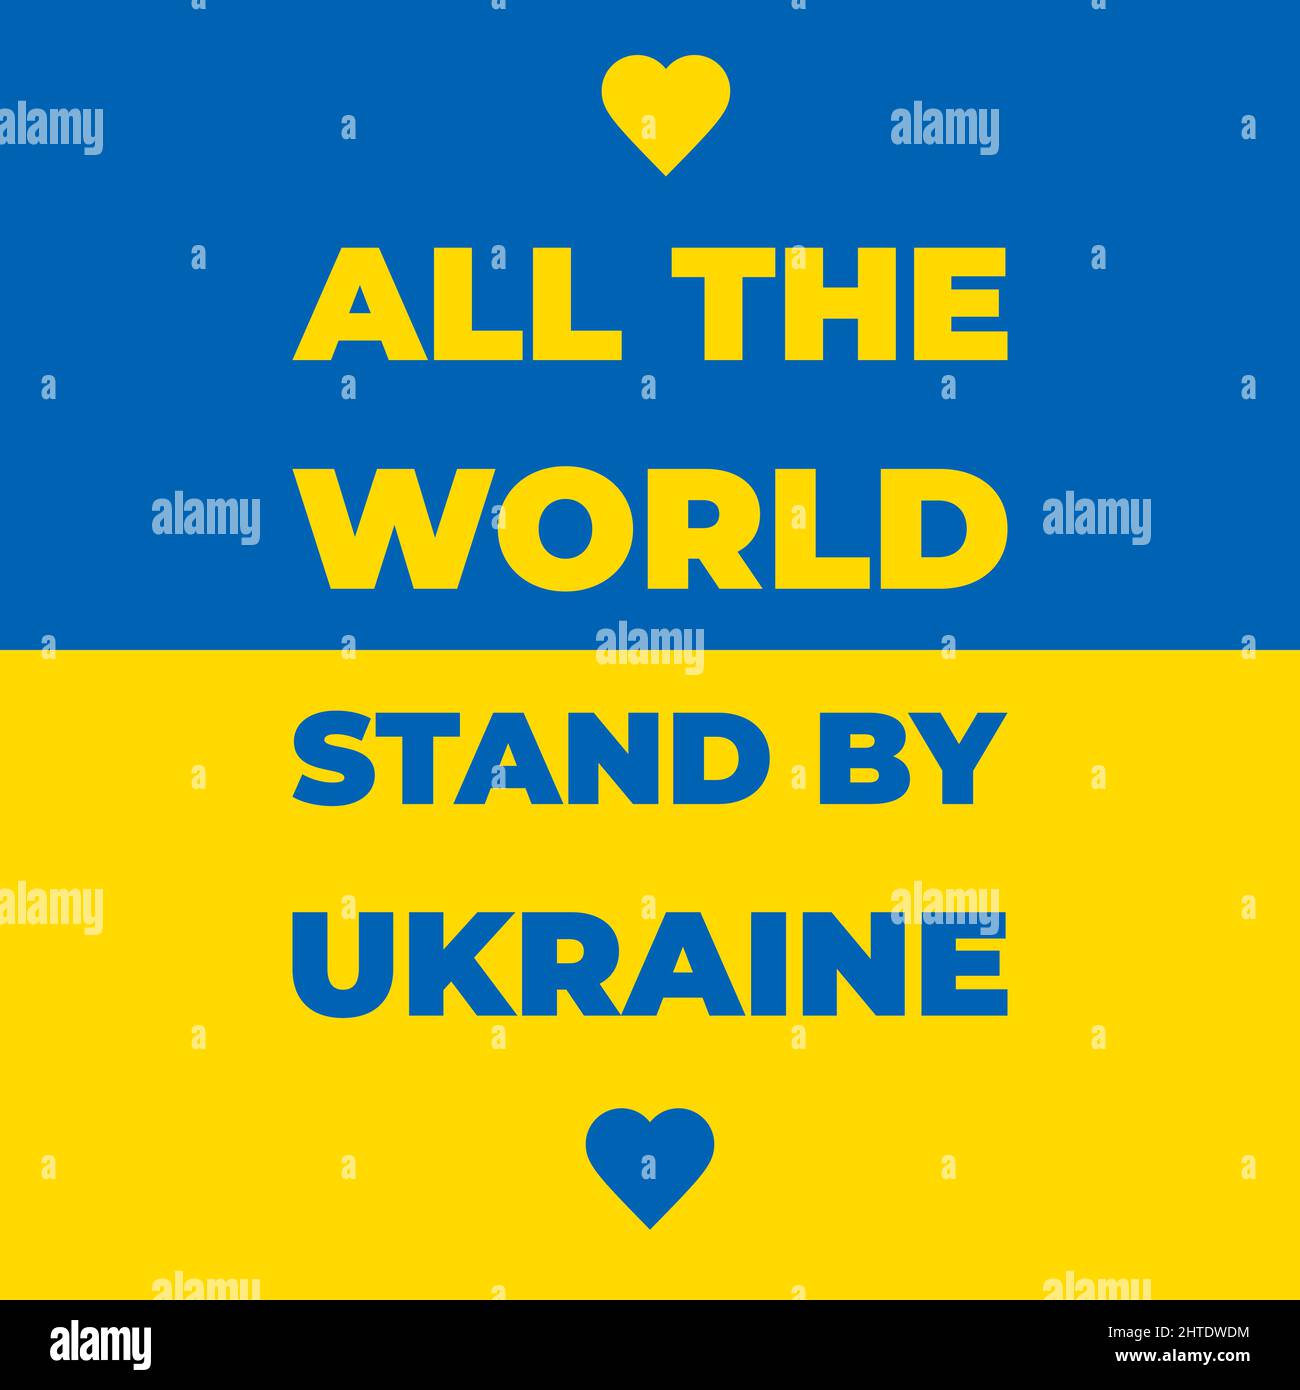 ALL THE WORLD STAND BY UKRAINE social media square banner with the colors of the Ukrainian flag. Stock Vector